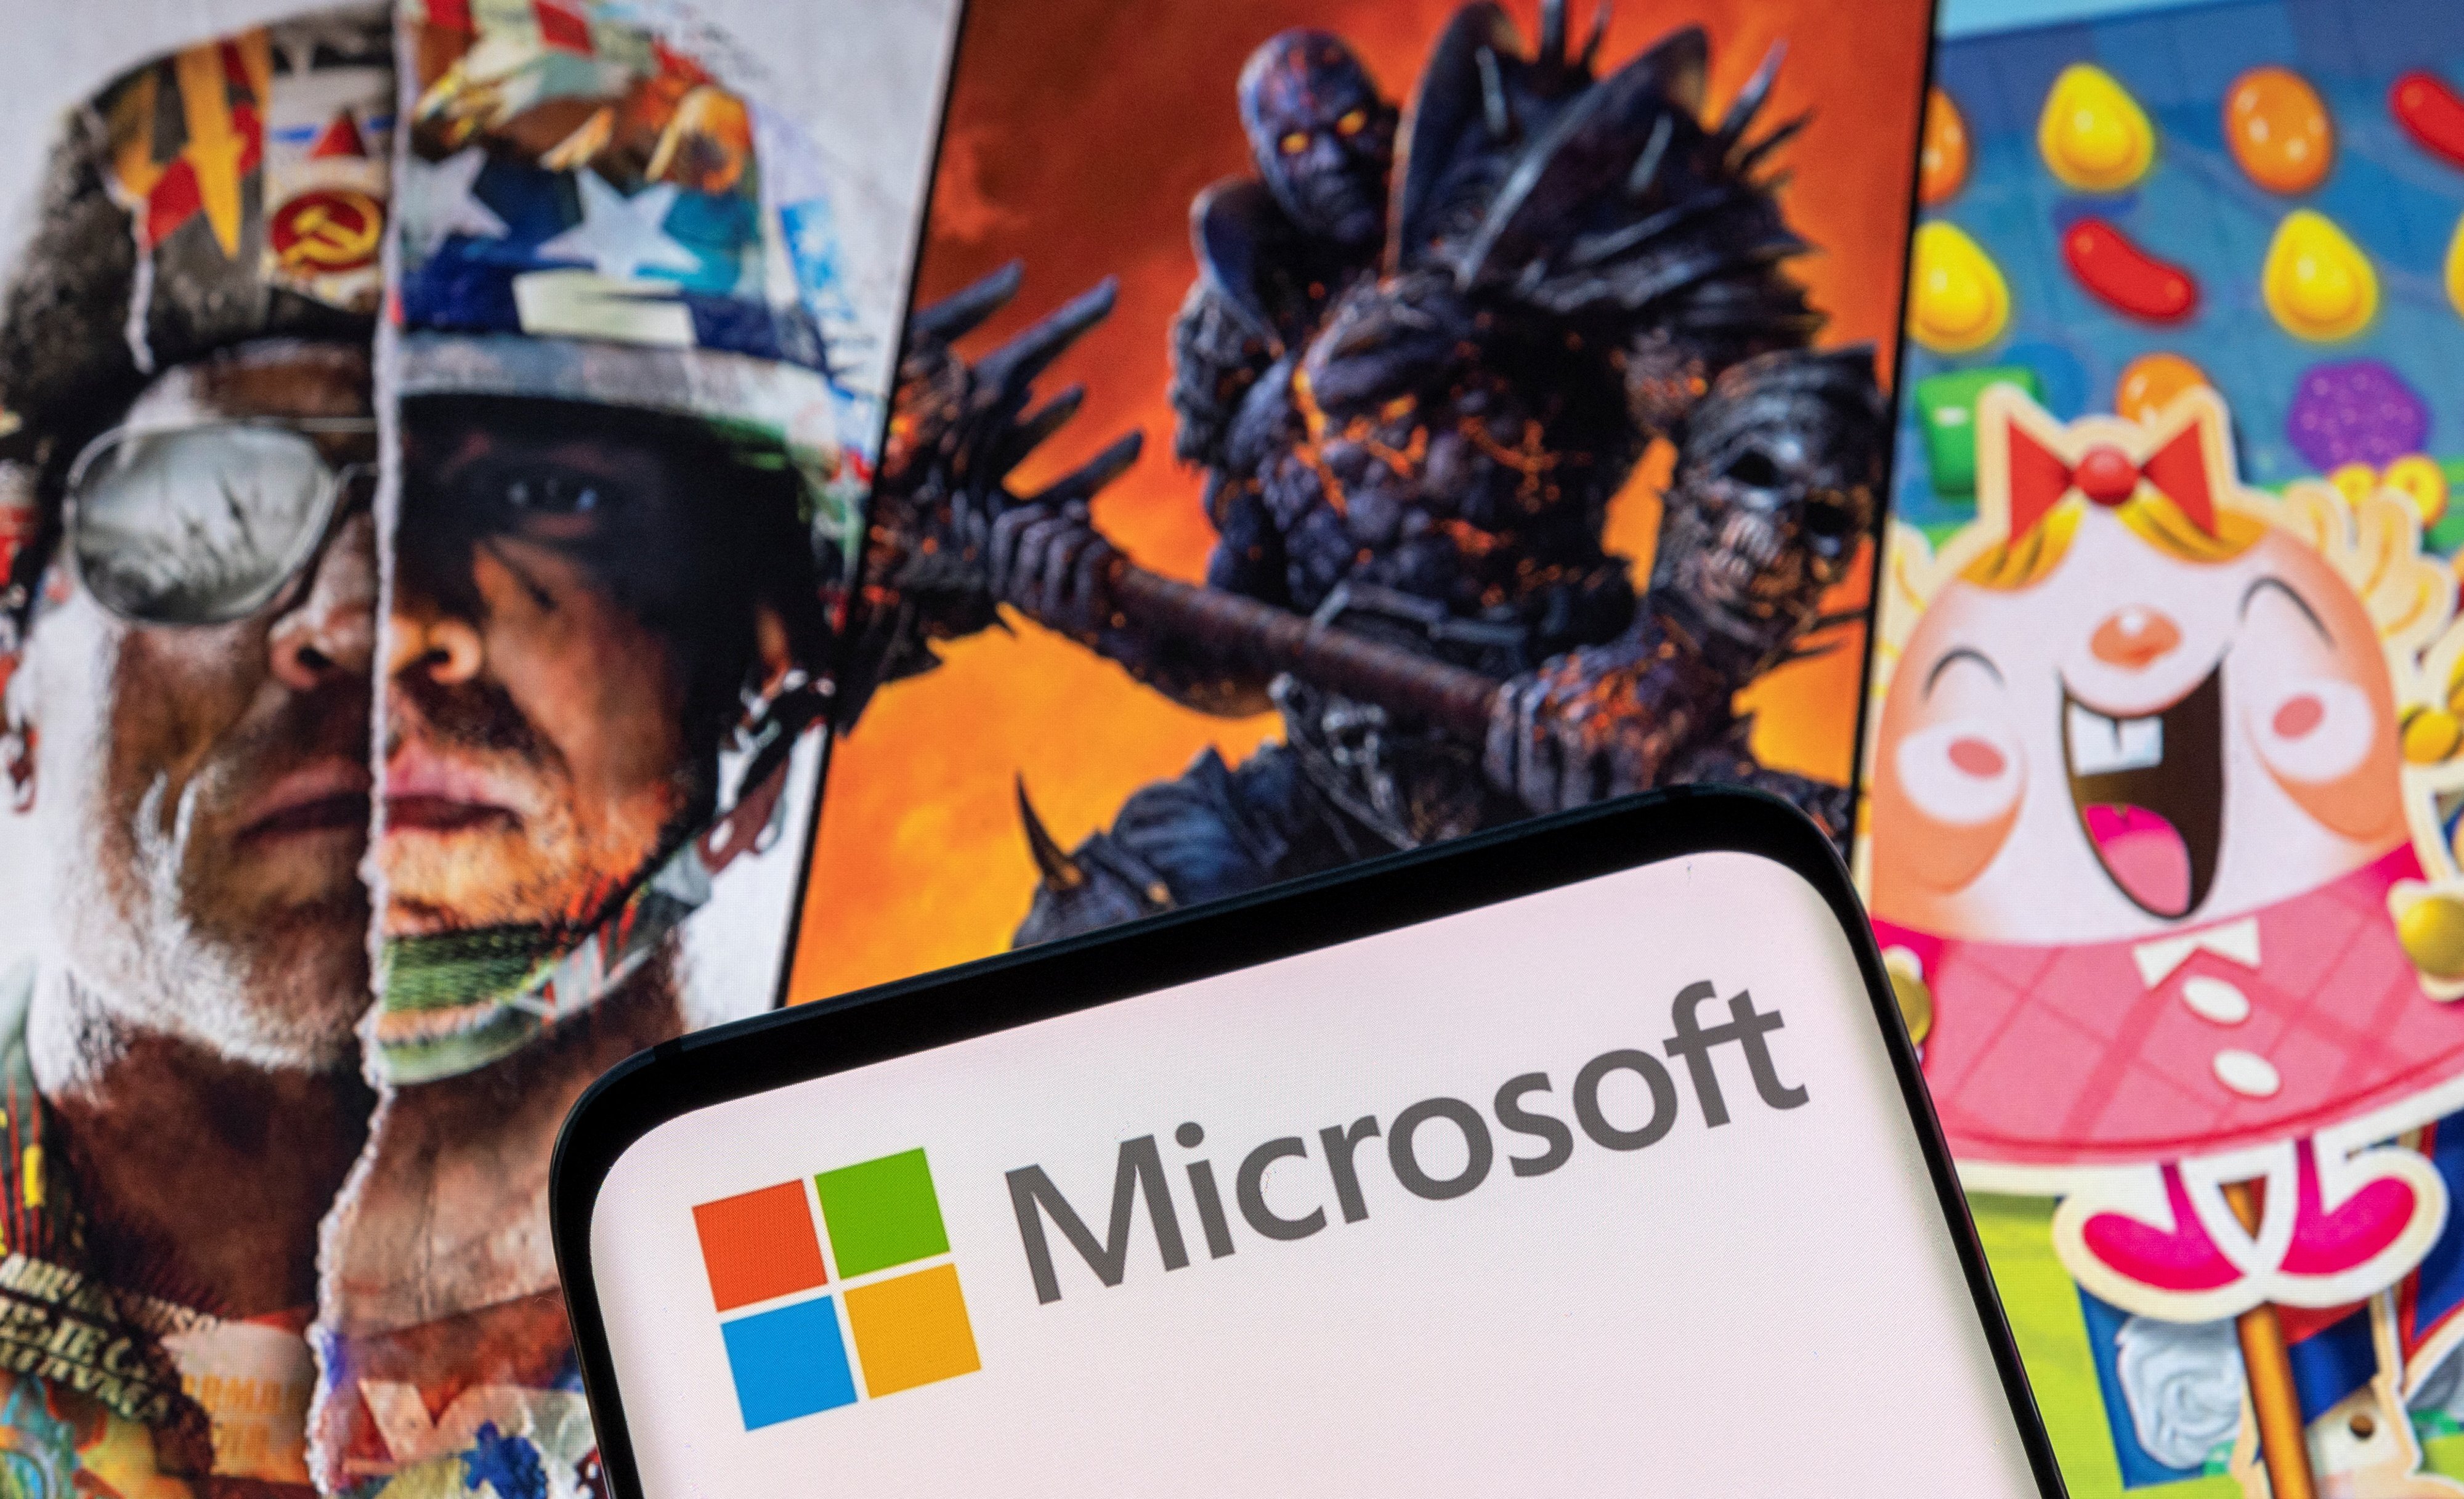 Microsoft to Buy Activision Blizzard in All-Cash Deal Valued at $75 Billion  - WSJ